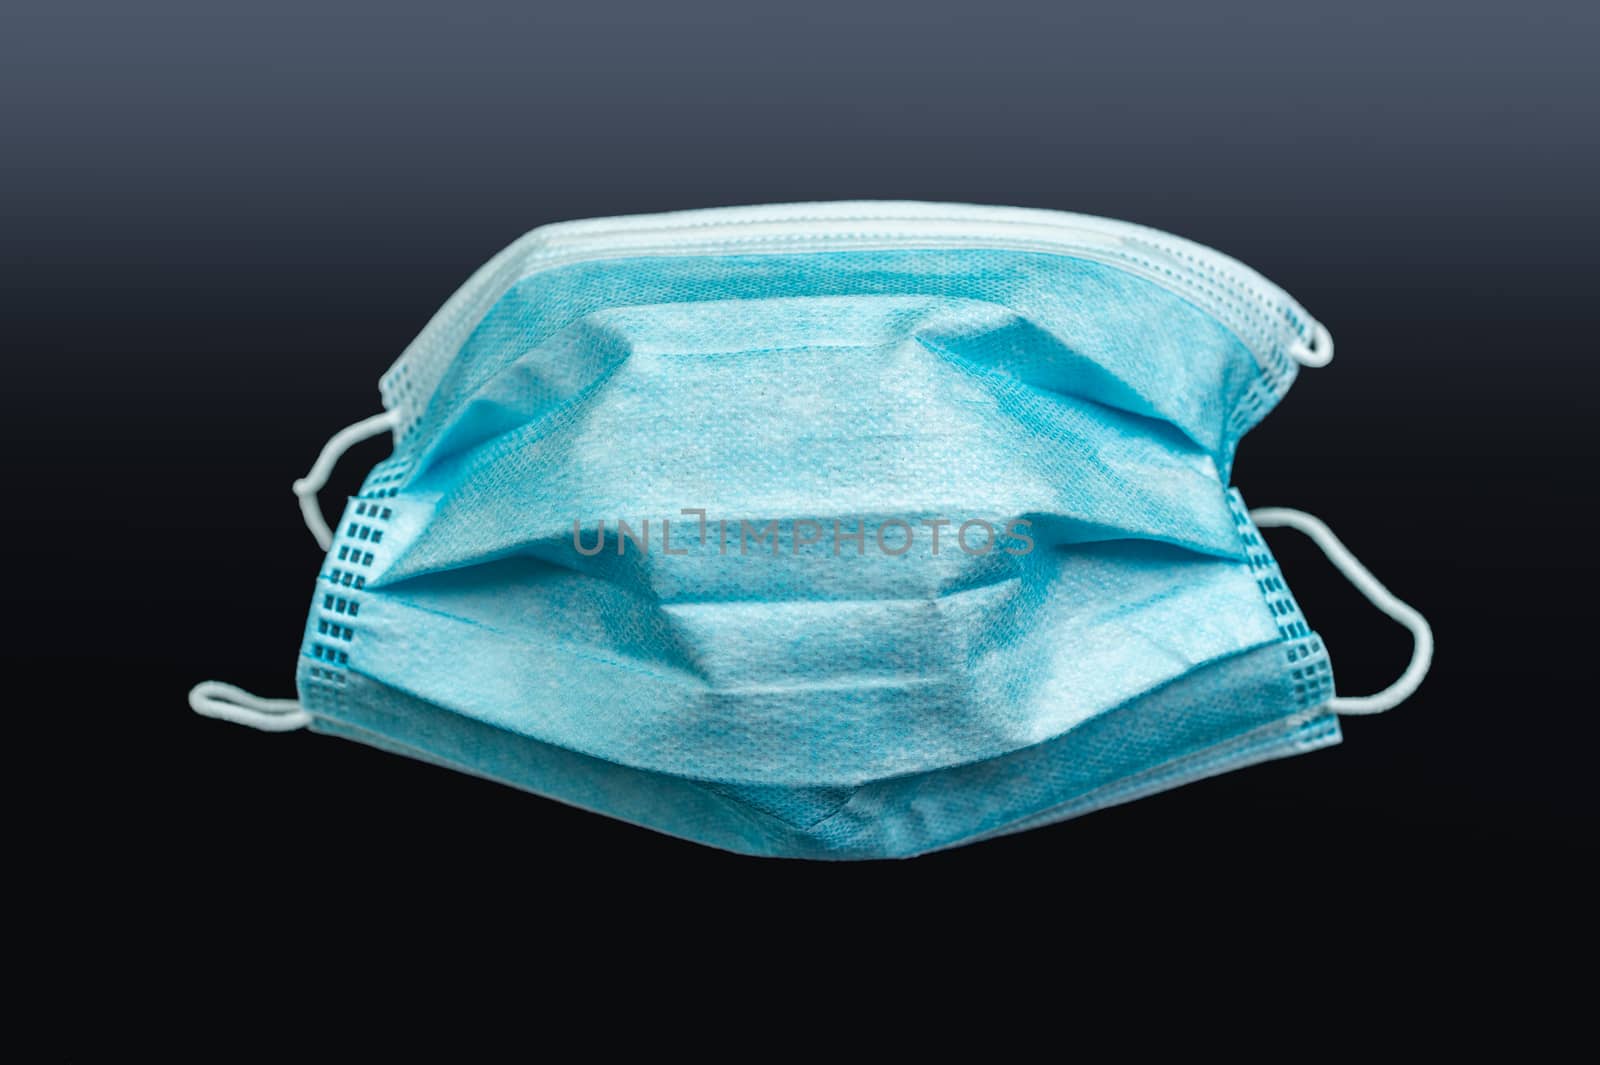 covid-19 surgical mask over dark background